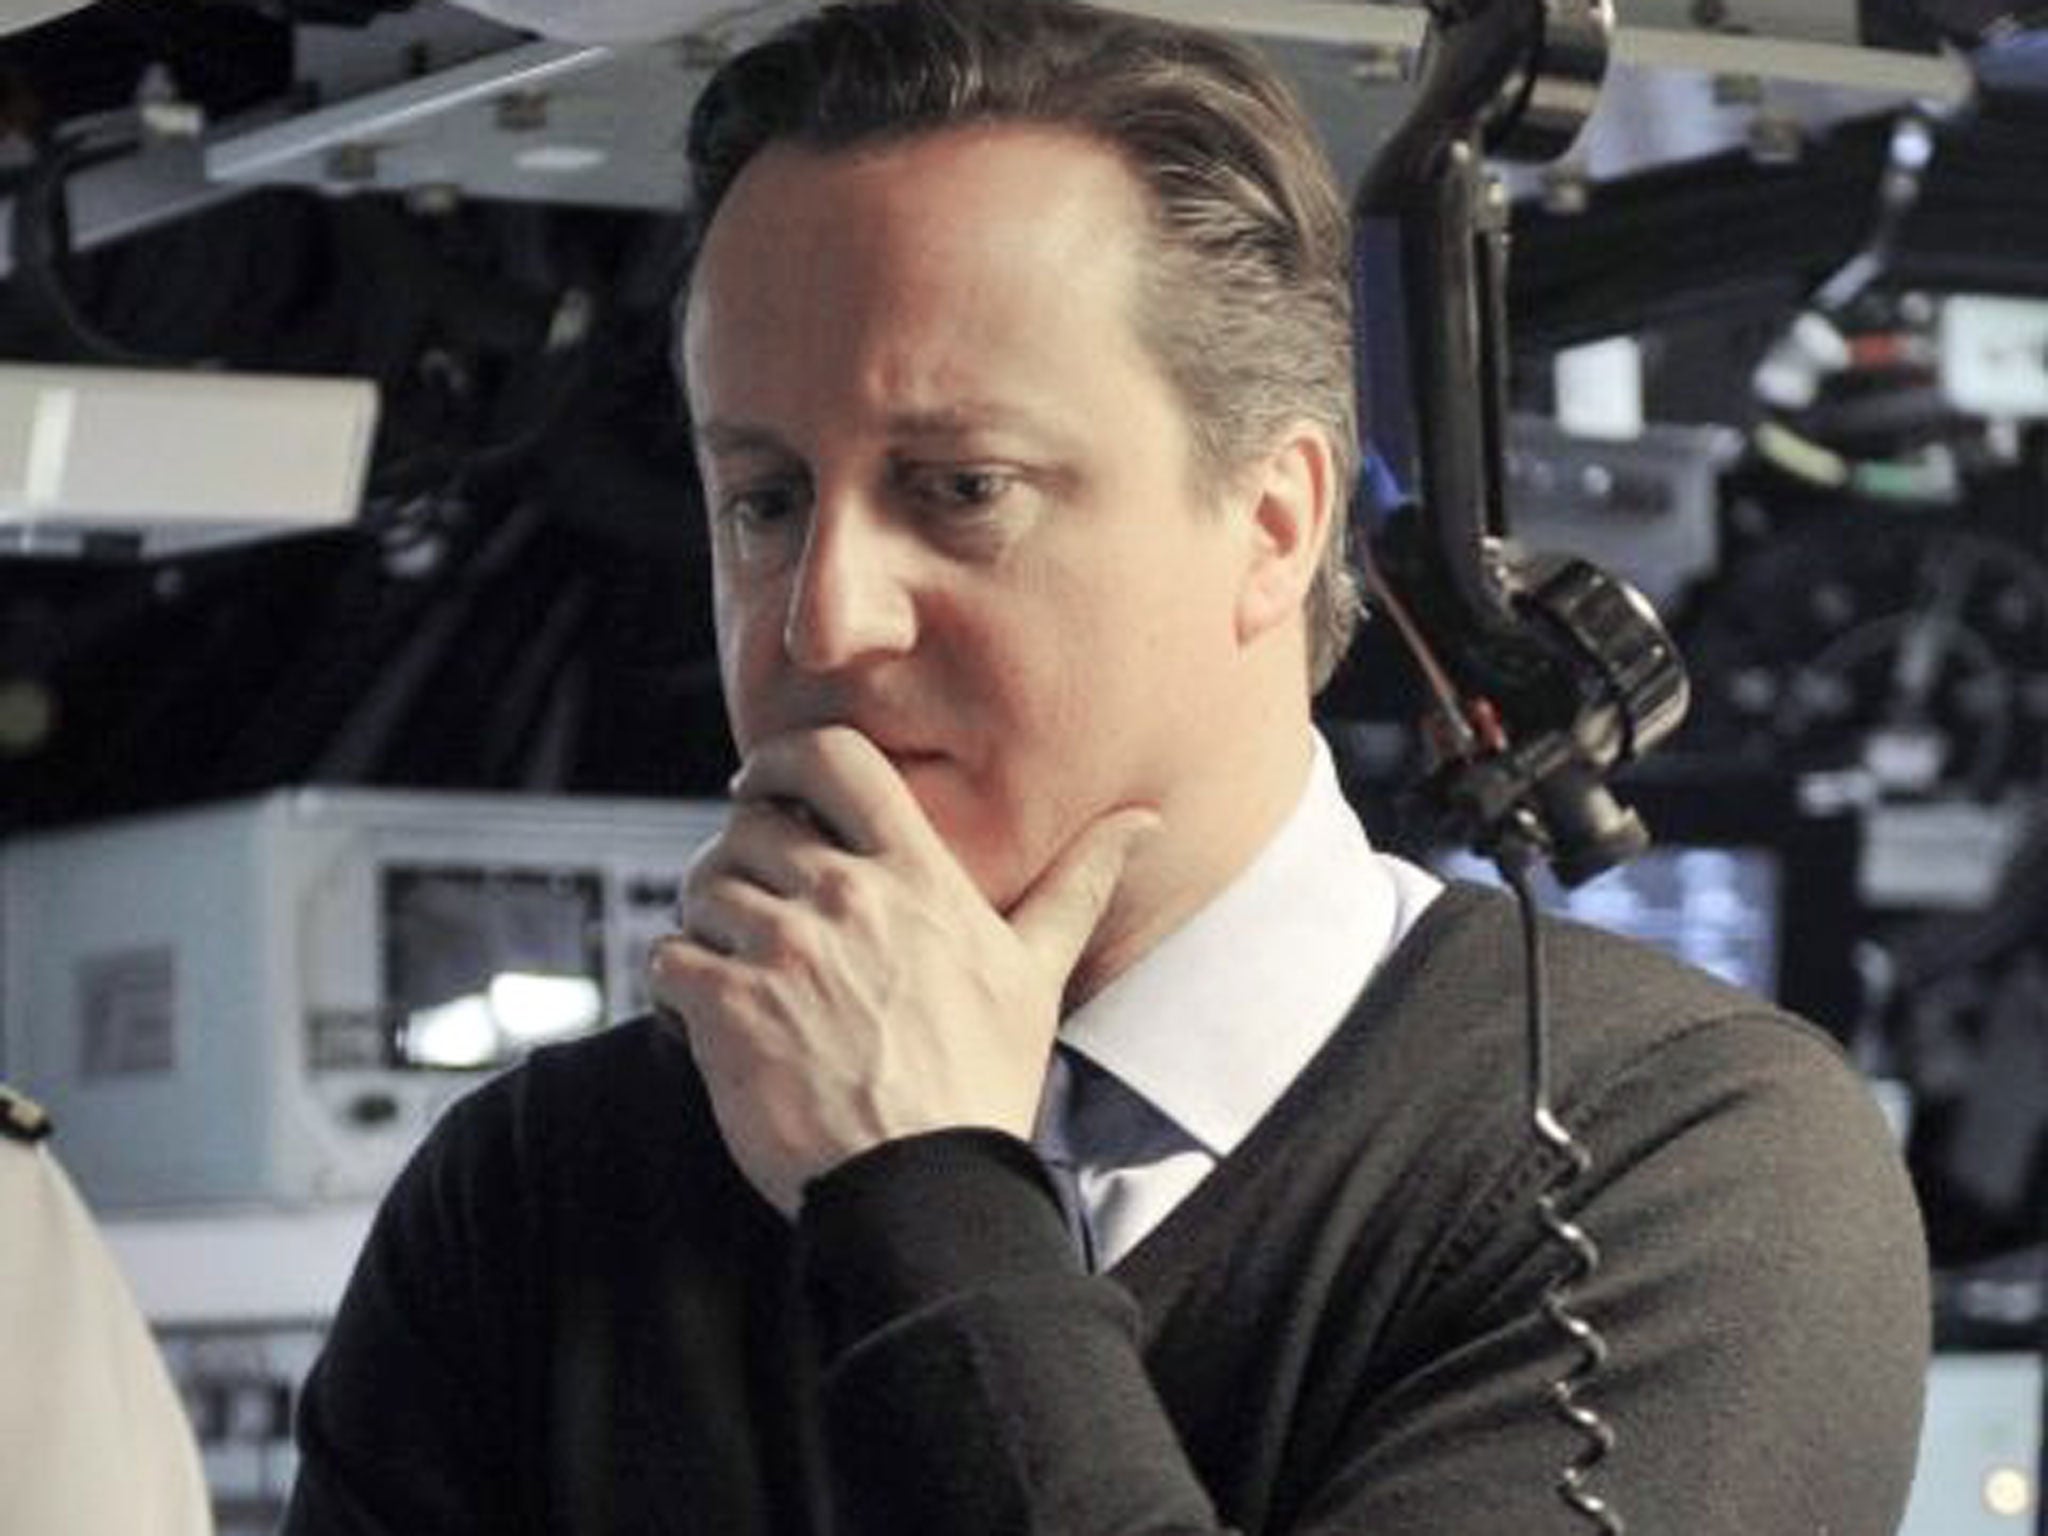 David Cameron’s defended the Trident nuclear missile system last week